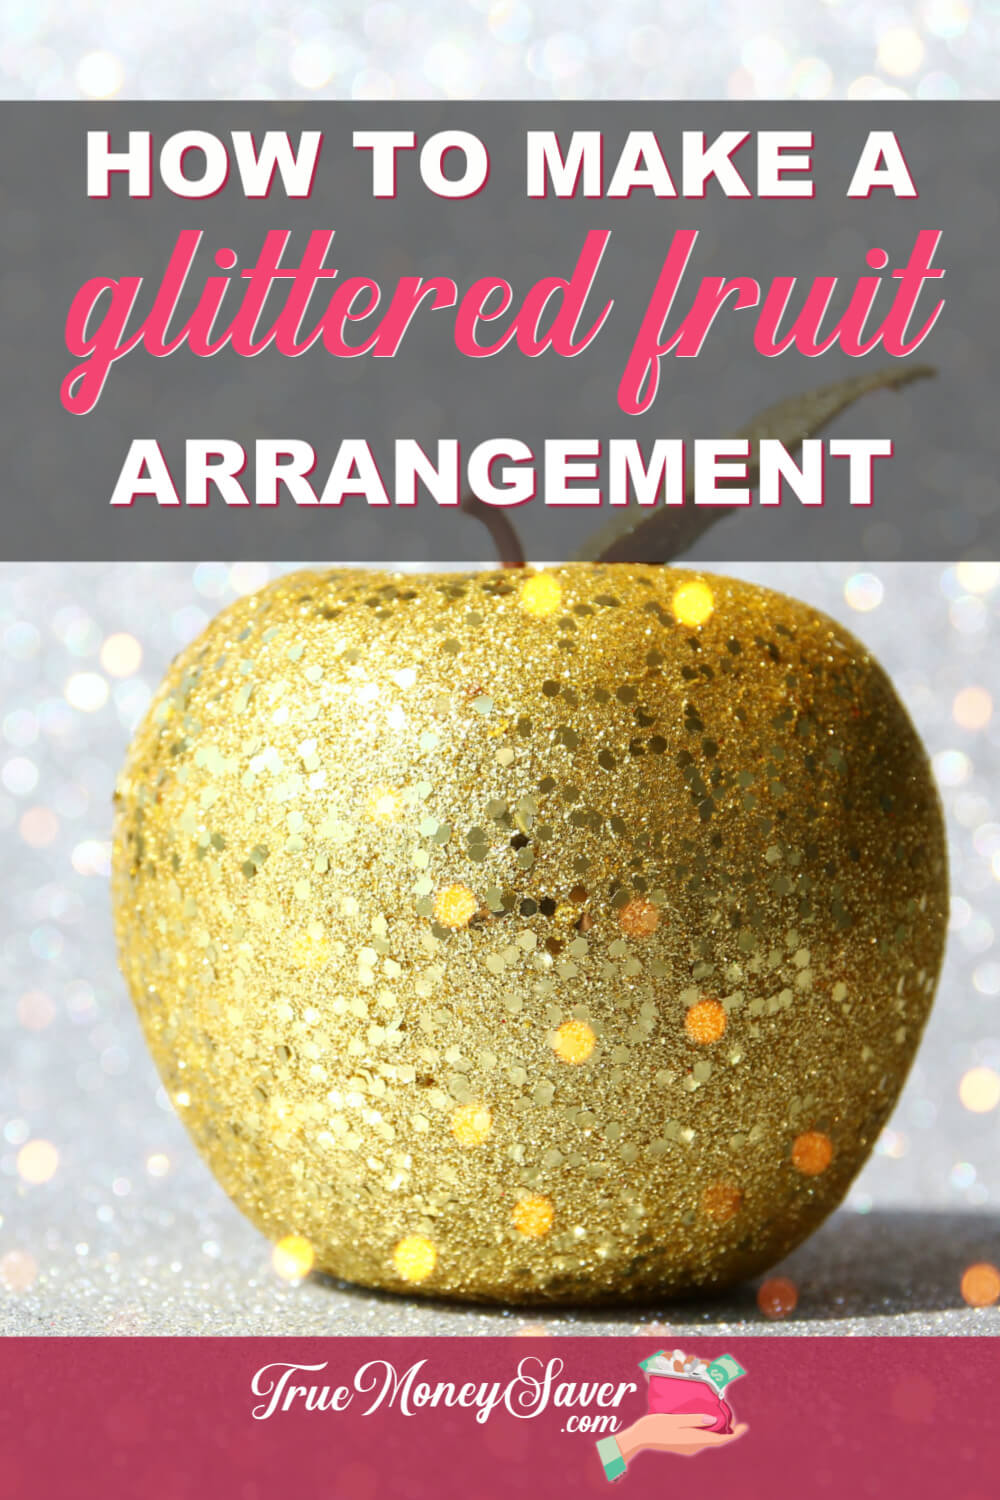 How To Make A Glittered Fruit Arrangement For The Holidays